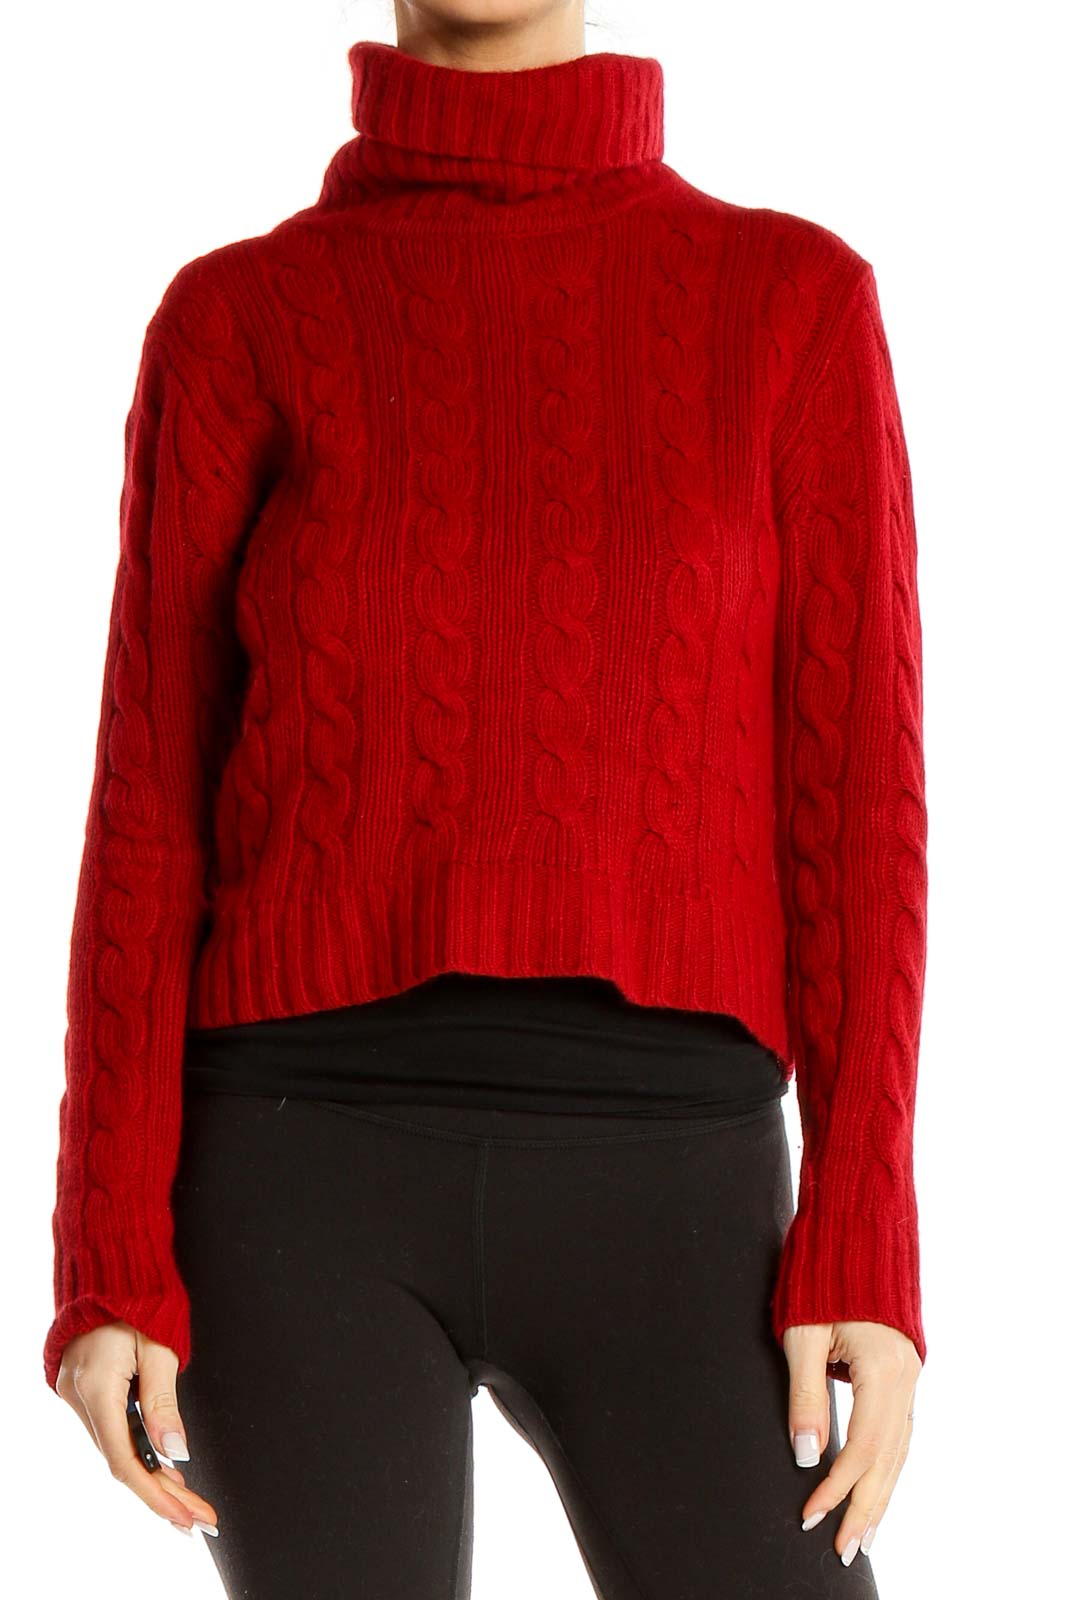 Red Cableknit Retro Sweater Front